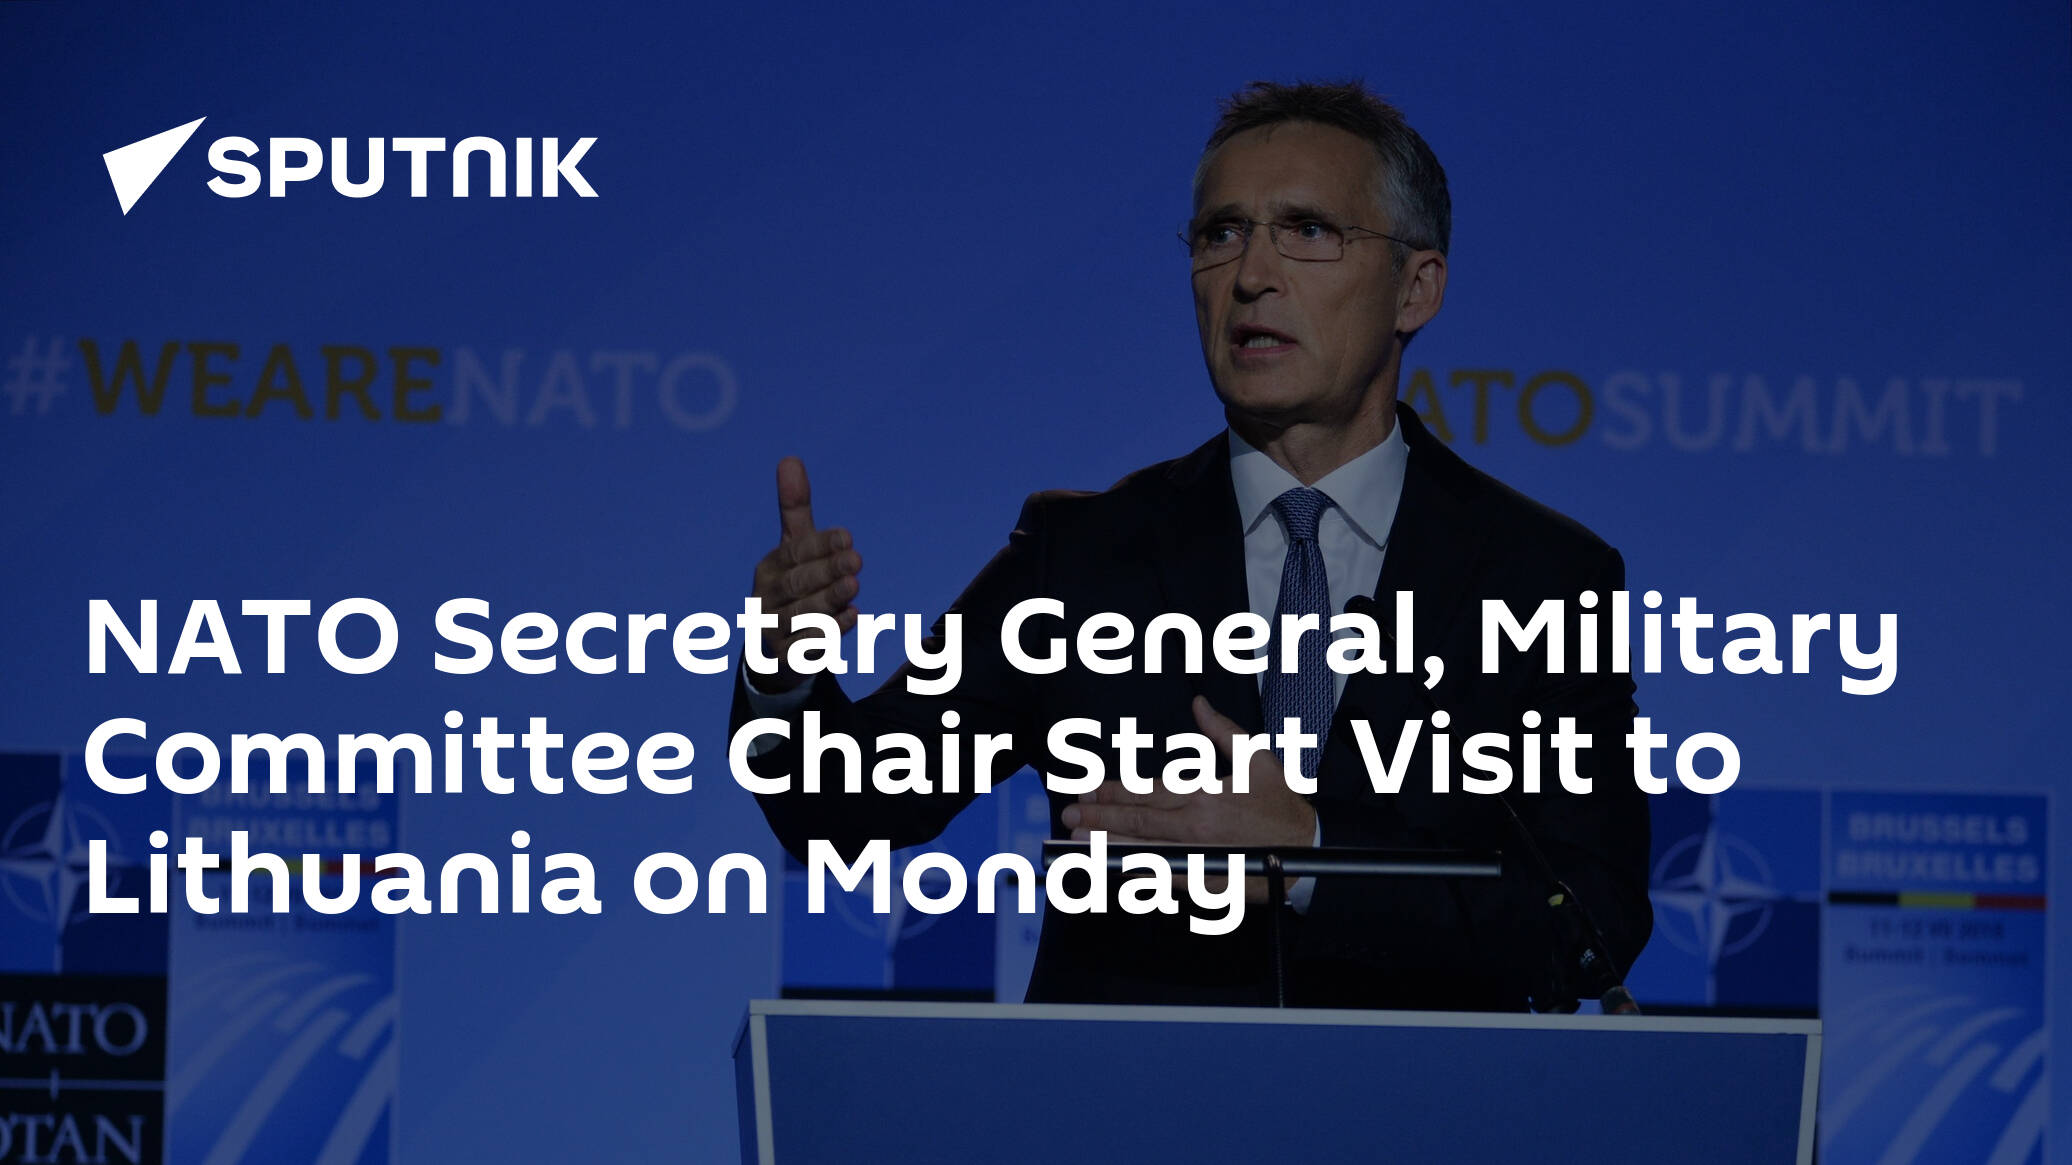 NATO Secretary General, Military Committee Chair Start Visit to Lithuania on Monday